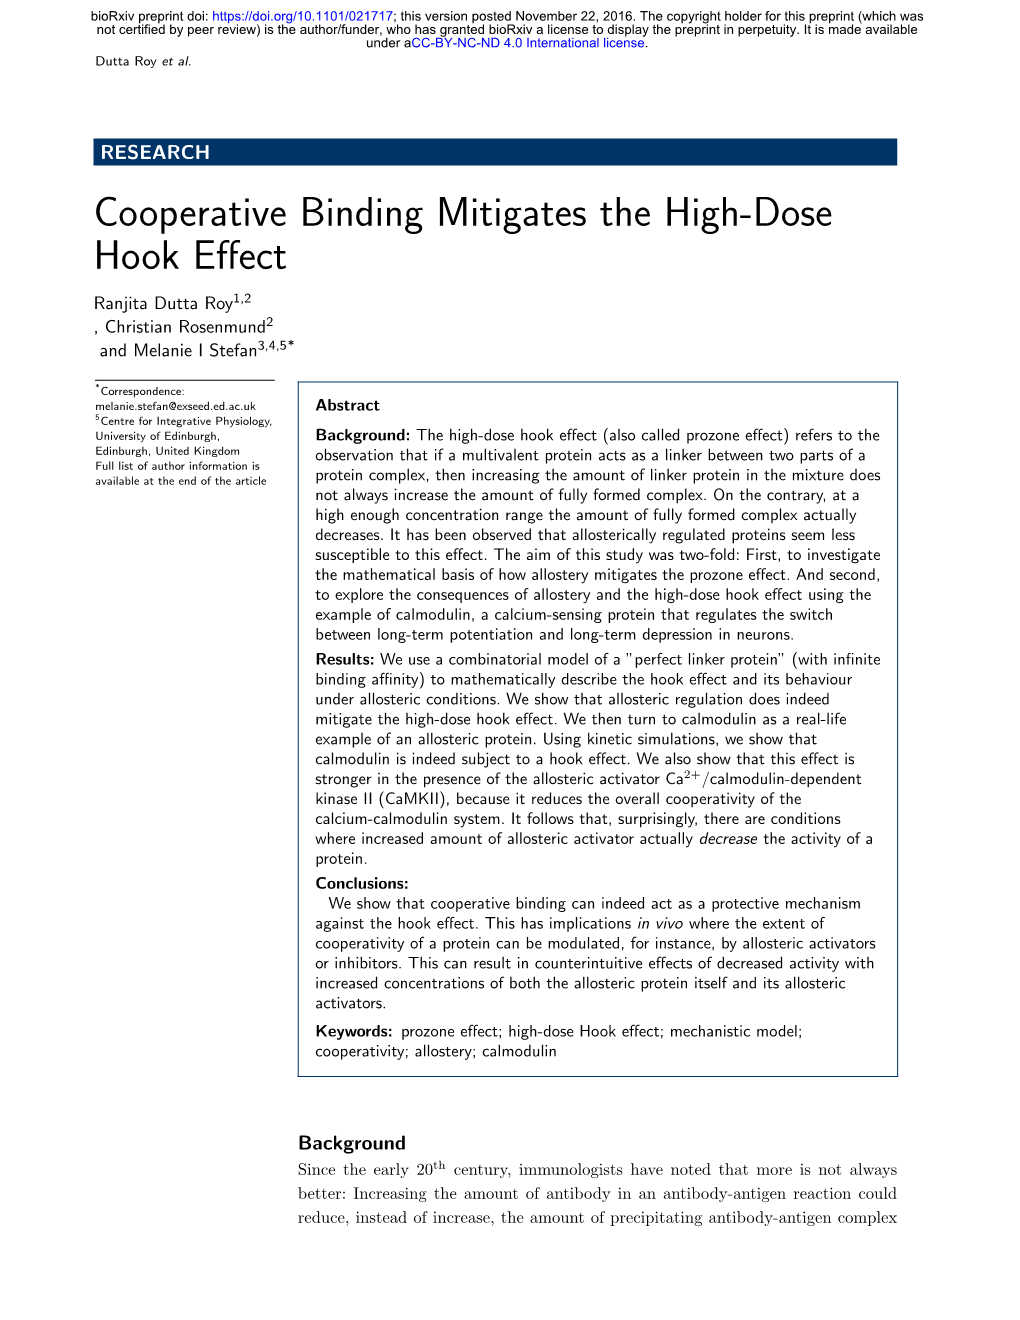 Cooperative Binding Mitigates the High-Dose Hook Effect